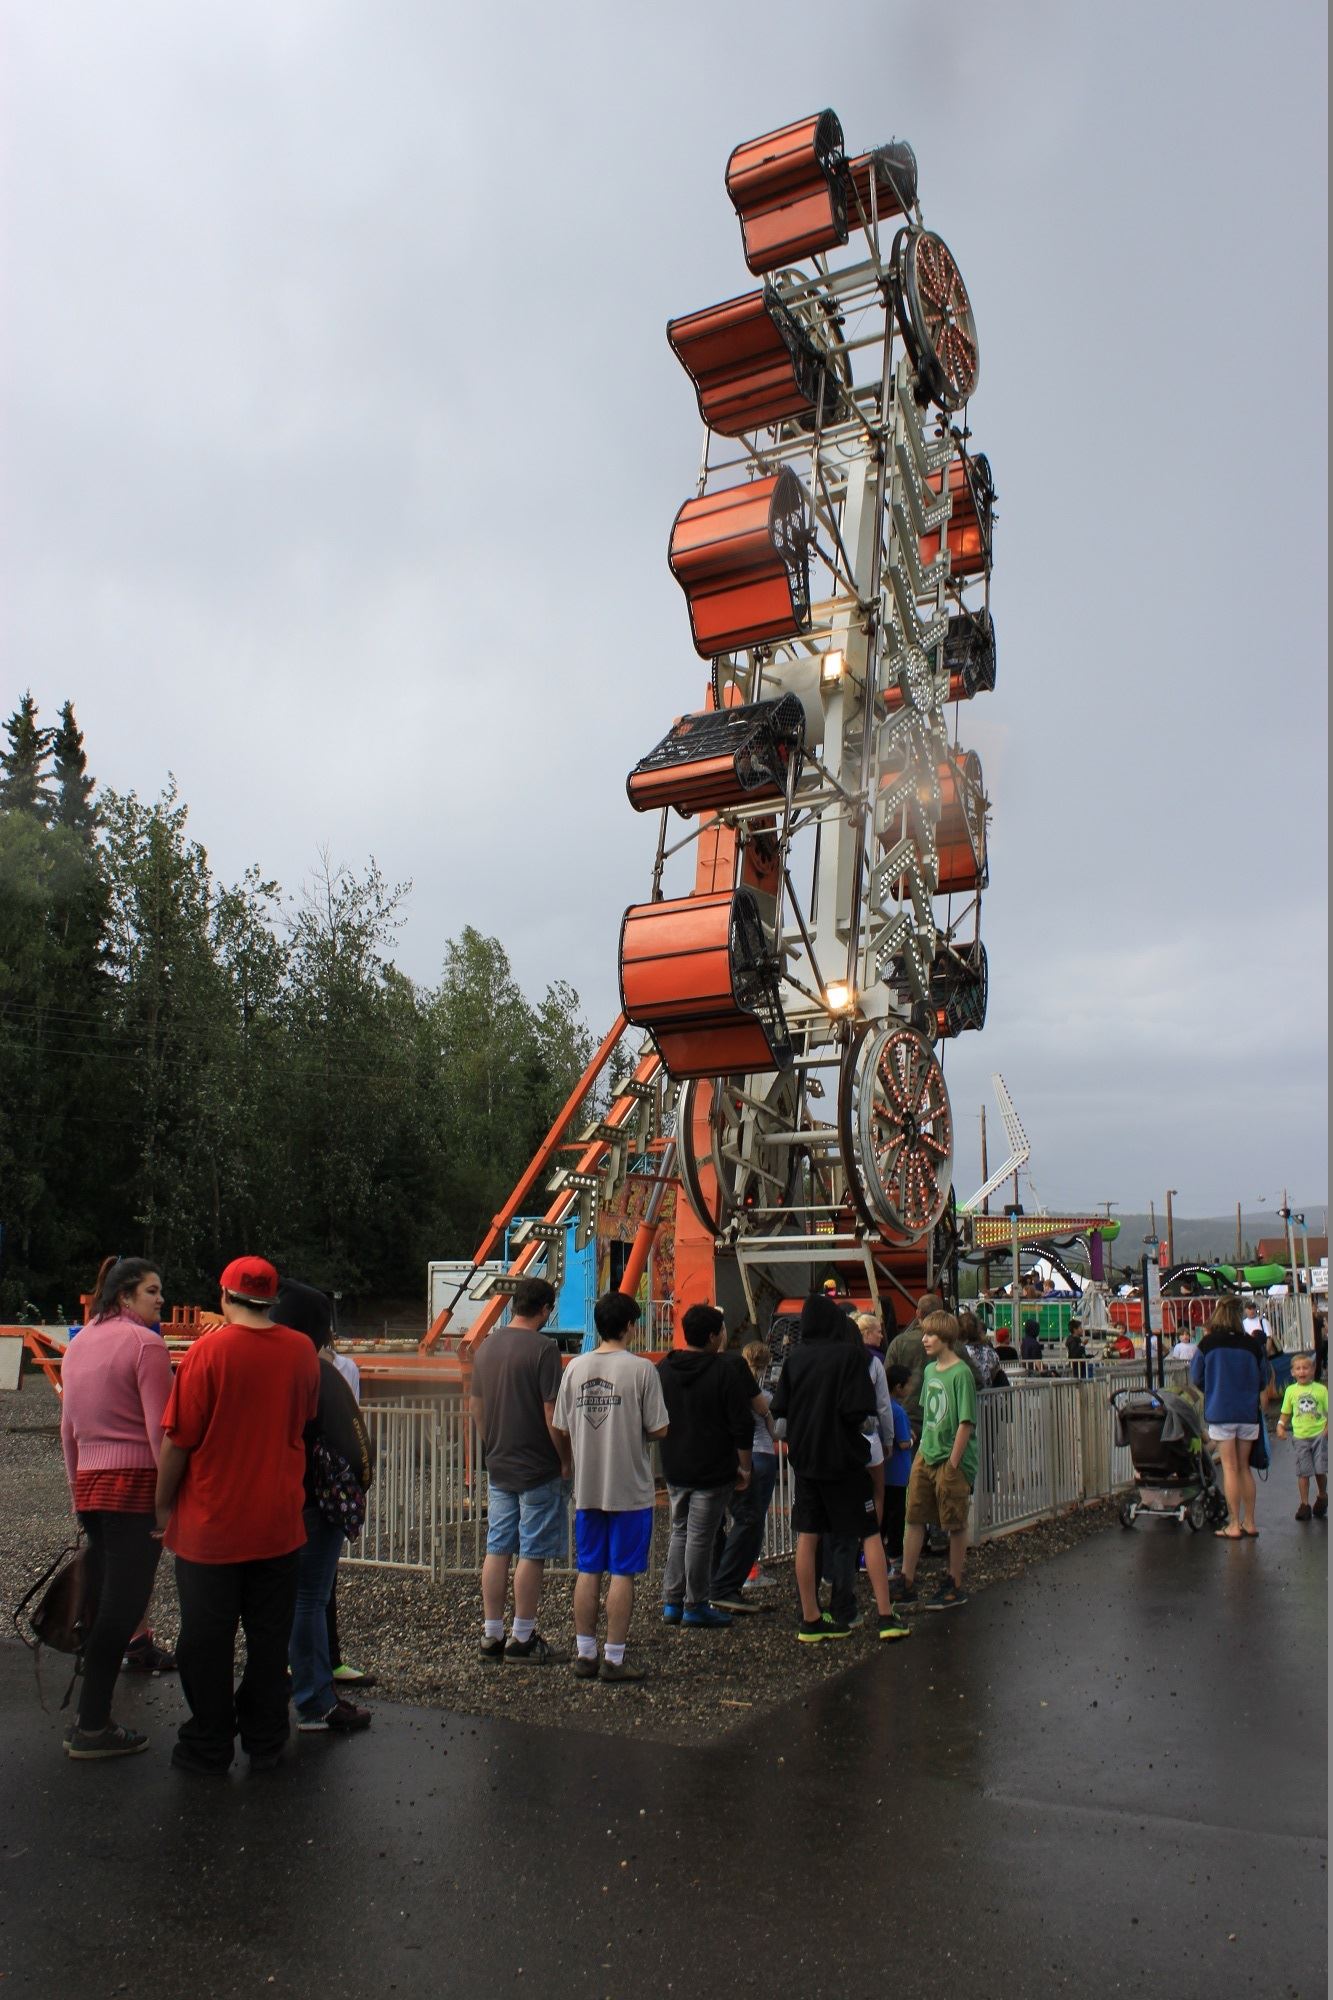 Midway Carnival Ride Tickets & Attractions in Fairbanks, AK | Tanana Valley State Fair